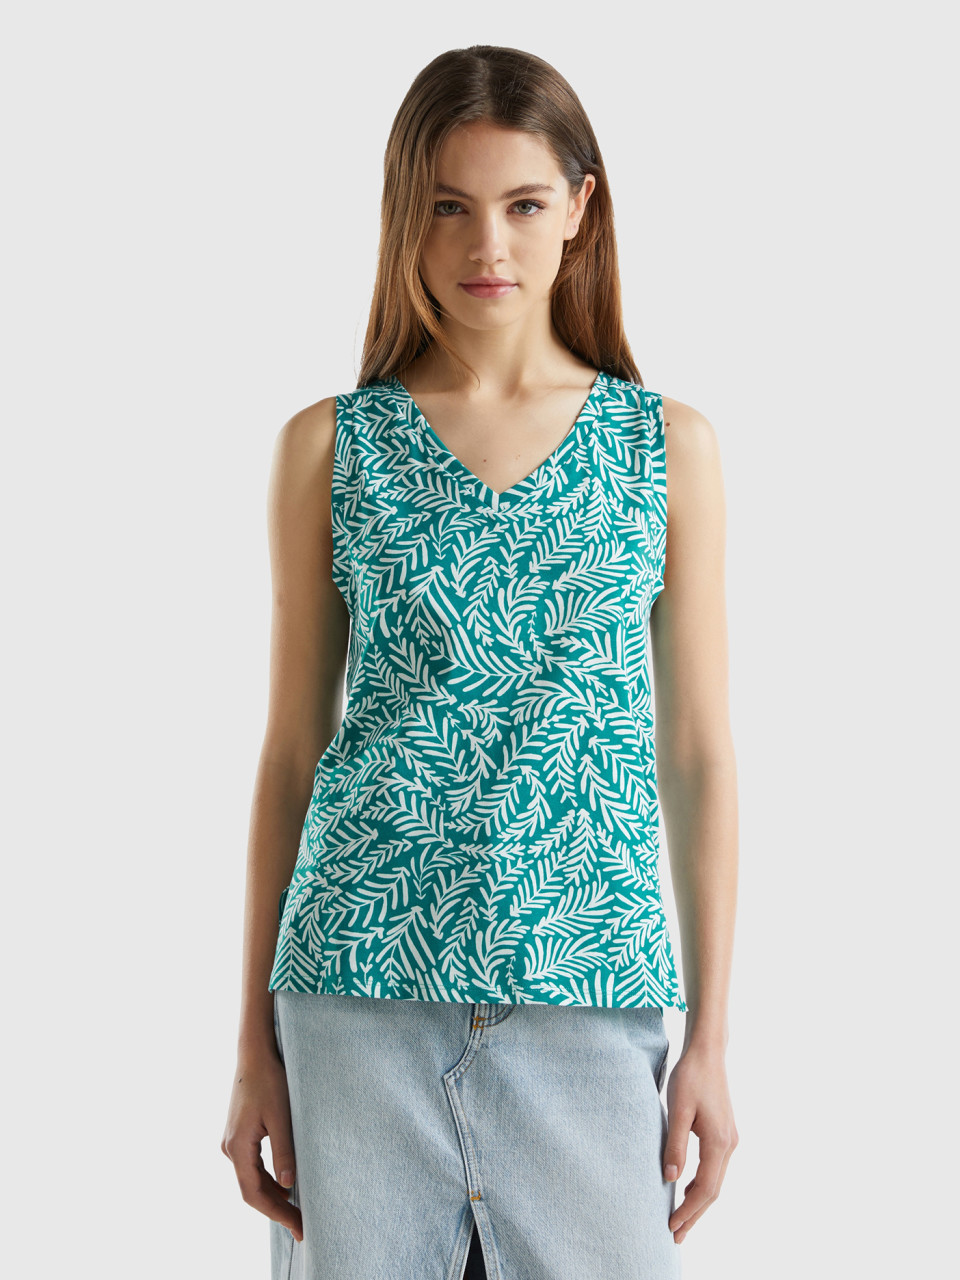 Benetton, Tank Top With Tropical Print, Teal, Women